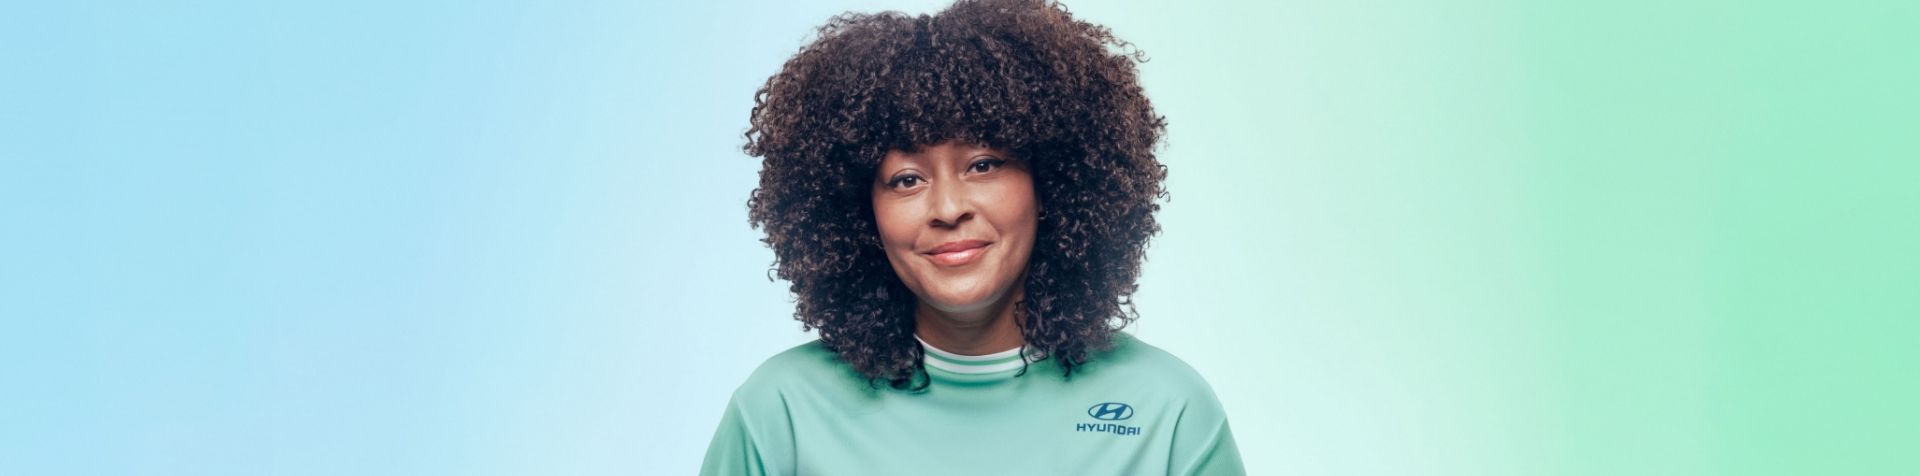 A close-up of Nicky Woo’s head and shoulders. Her hair is curly, and she is wearing a light green Team Century jersey with the Hyundai logo on it.